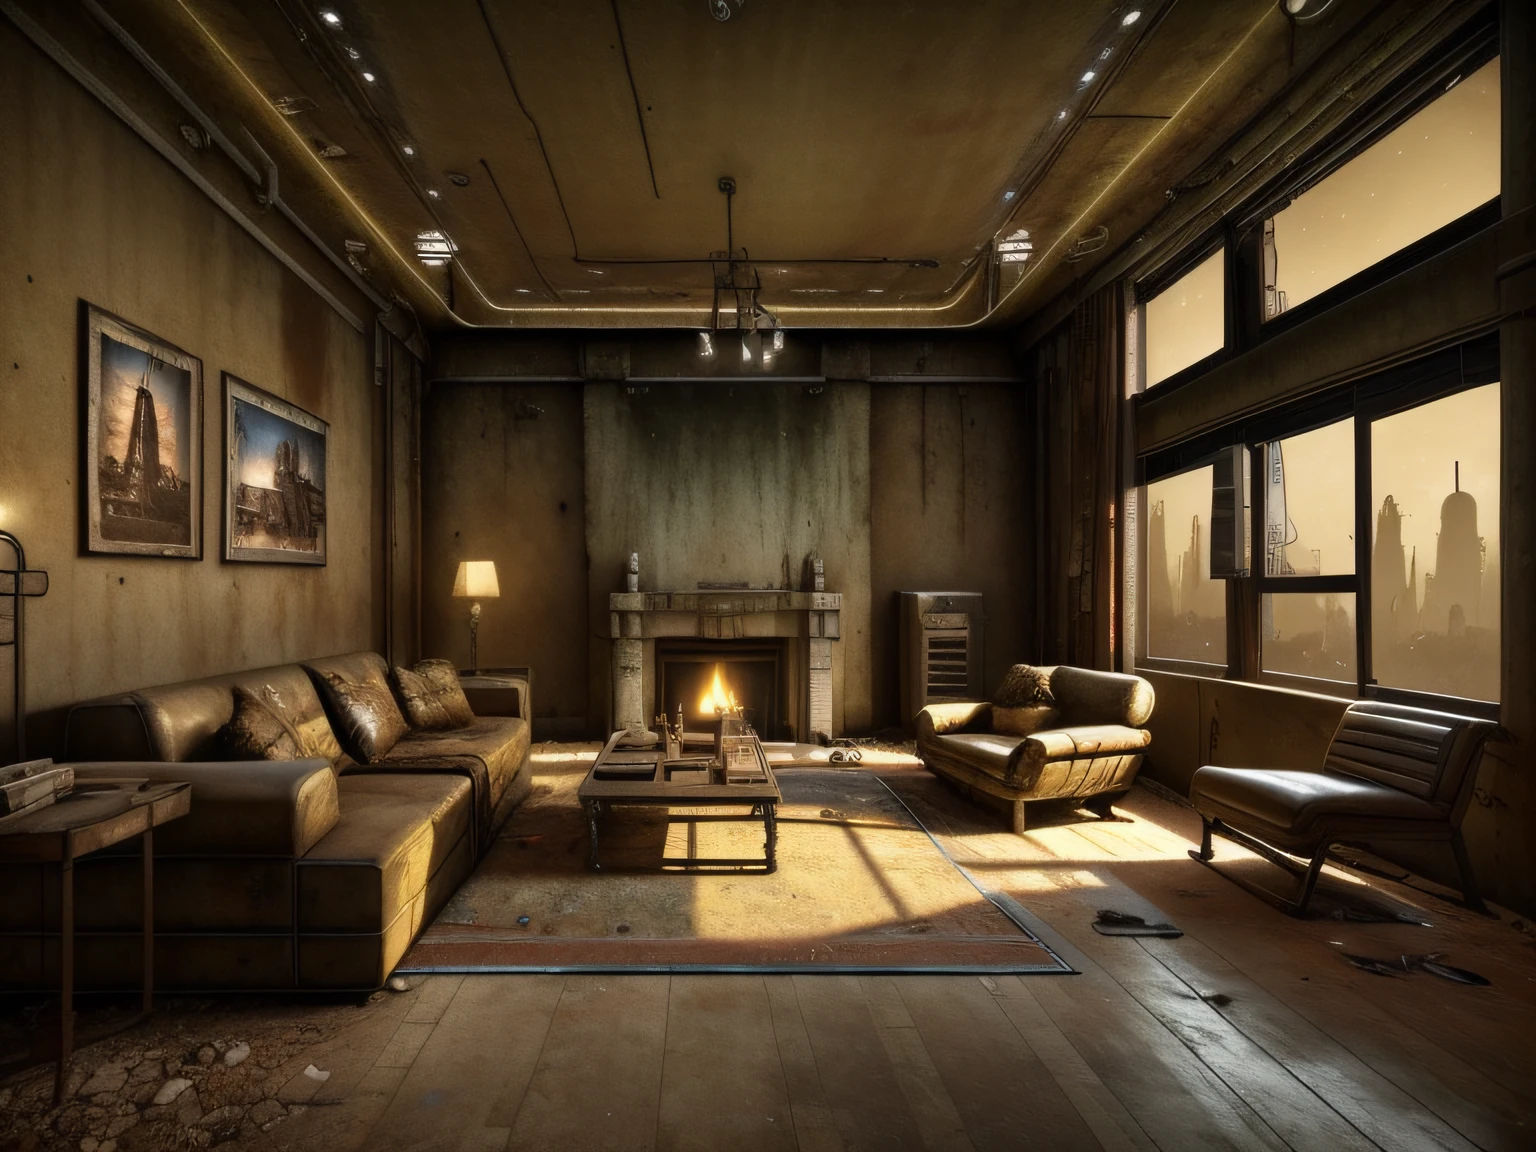 retinas, masutepiece, ccurate, Super Detail, Super Detail, high details, High quality, awardwinning, Best Quality, hight resolution,realistic CG,There is a living room with a lot of furniture and windows,High-quality photos,Midnight Living Room, Midnight time,(,Inorganic fluorescent lamps:1.3),The apocalyptic view of the naked light bulb, (post apocalyptic atmosphere:1.2), (Post-apocalyptic room interior:1.5), (Fallout concept art:1.4),Worn transceivers,Post-apocalyptic wasteland, Post-apocalyptic wasteland, post apocalyptic scene, (Apocalyptic landscape, post apocalyptic atmosphere, post apocalyptic setting, Post-apocalyptic world, Postapocalypse), post apocalyptic scenery,(Scenic dystopian environment),Realistic photo quality,Has a sense of life,(Midnight:1.4)